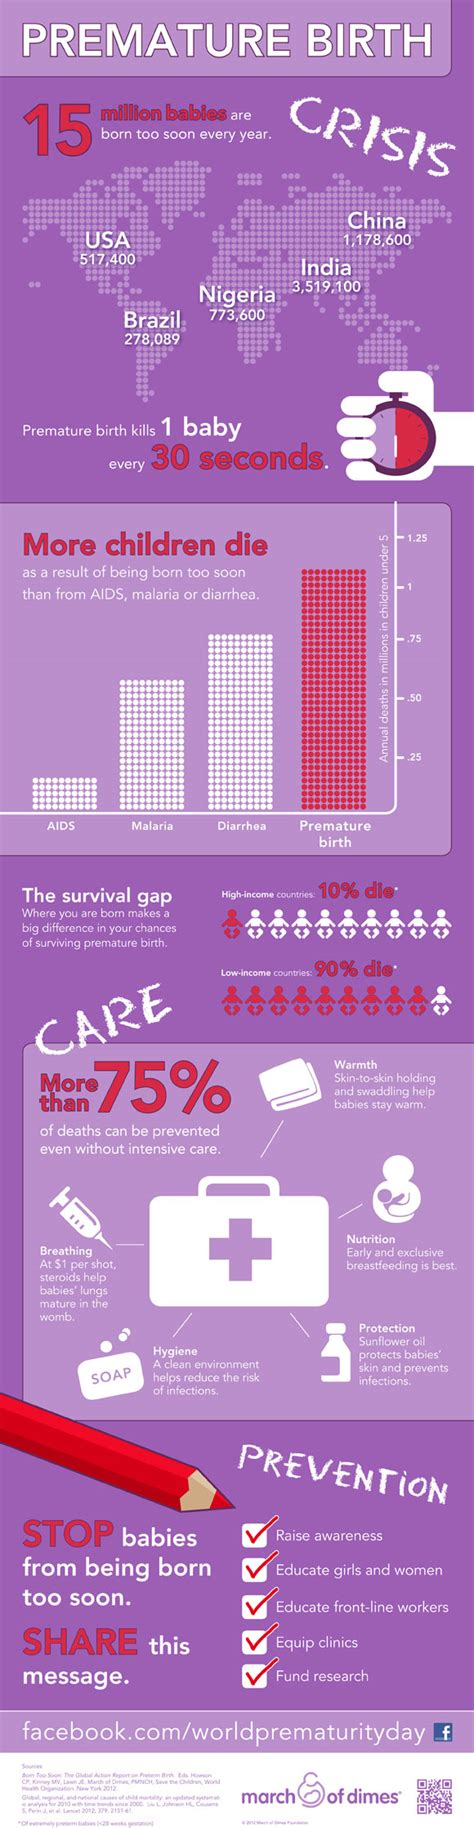 Infographic The Global Problem Of Premature Birth March Of Dimes